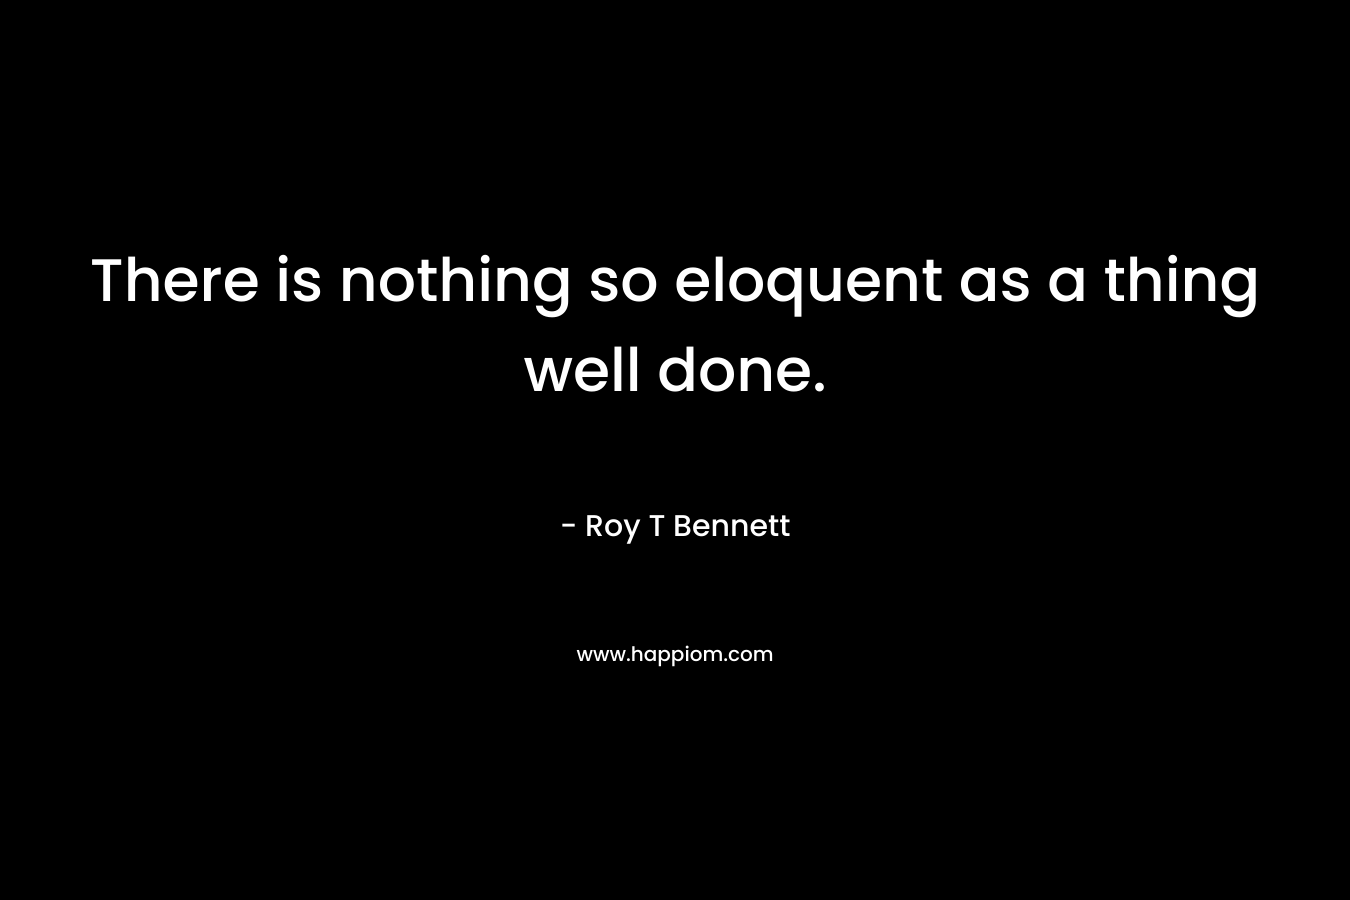 There is nothing so eloquent as a thing well done. – Roy T Bennett